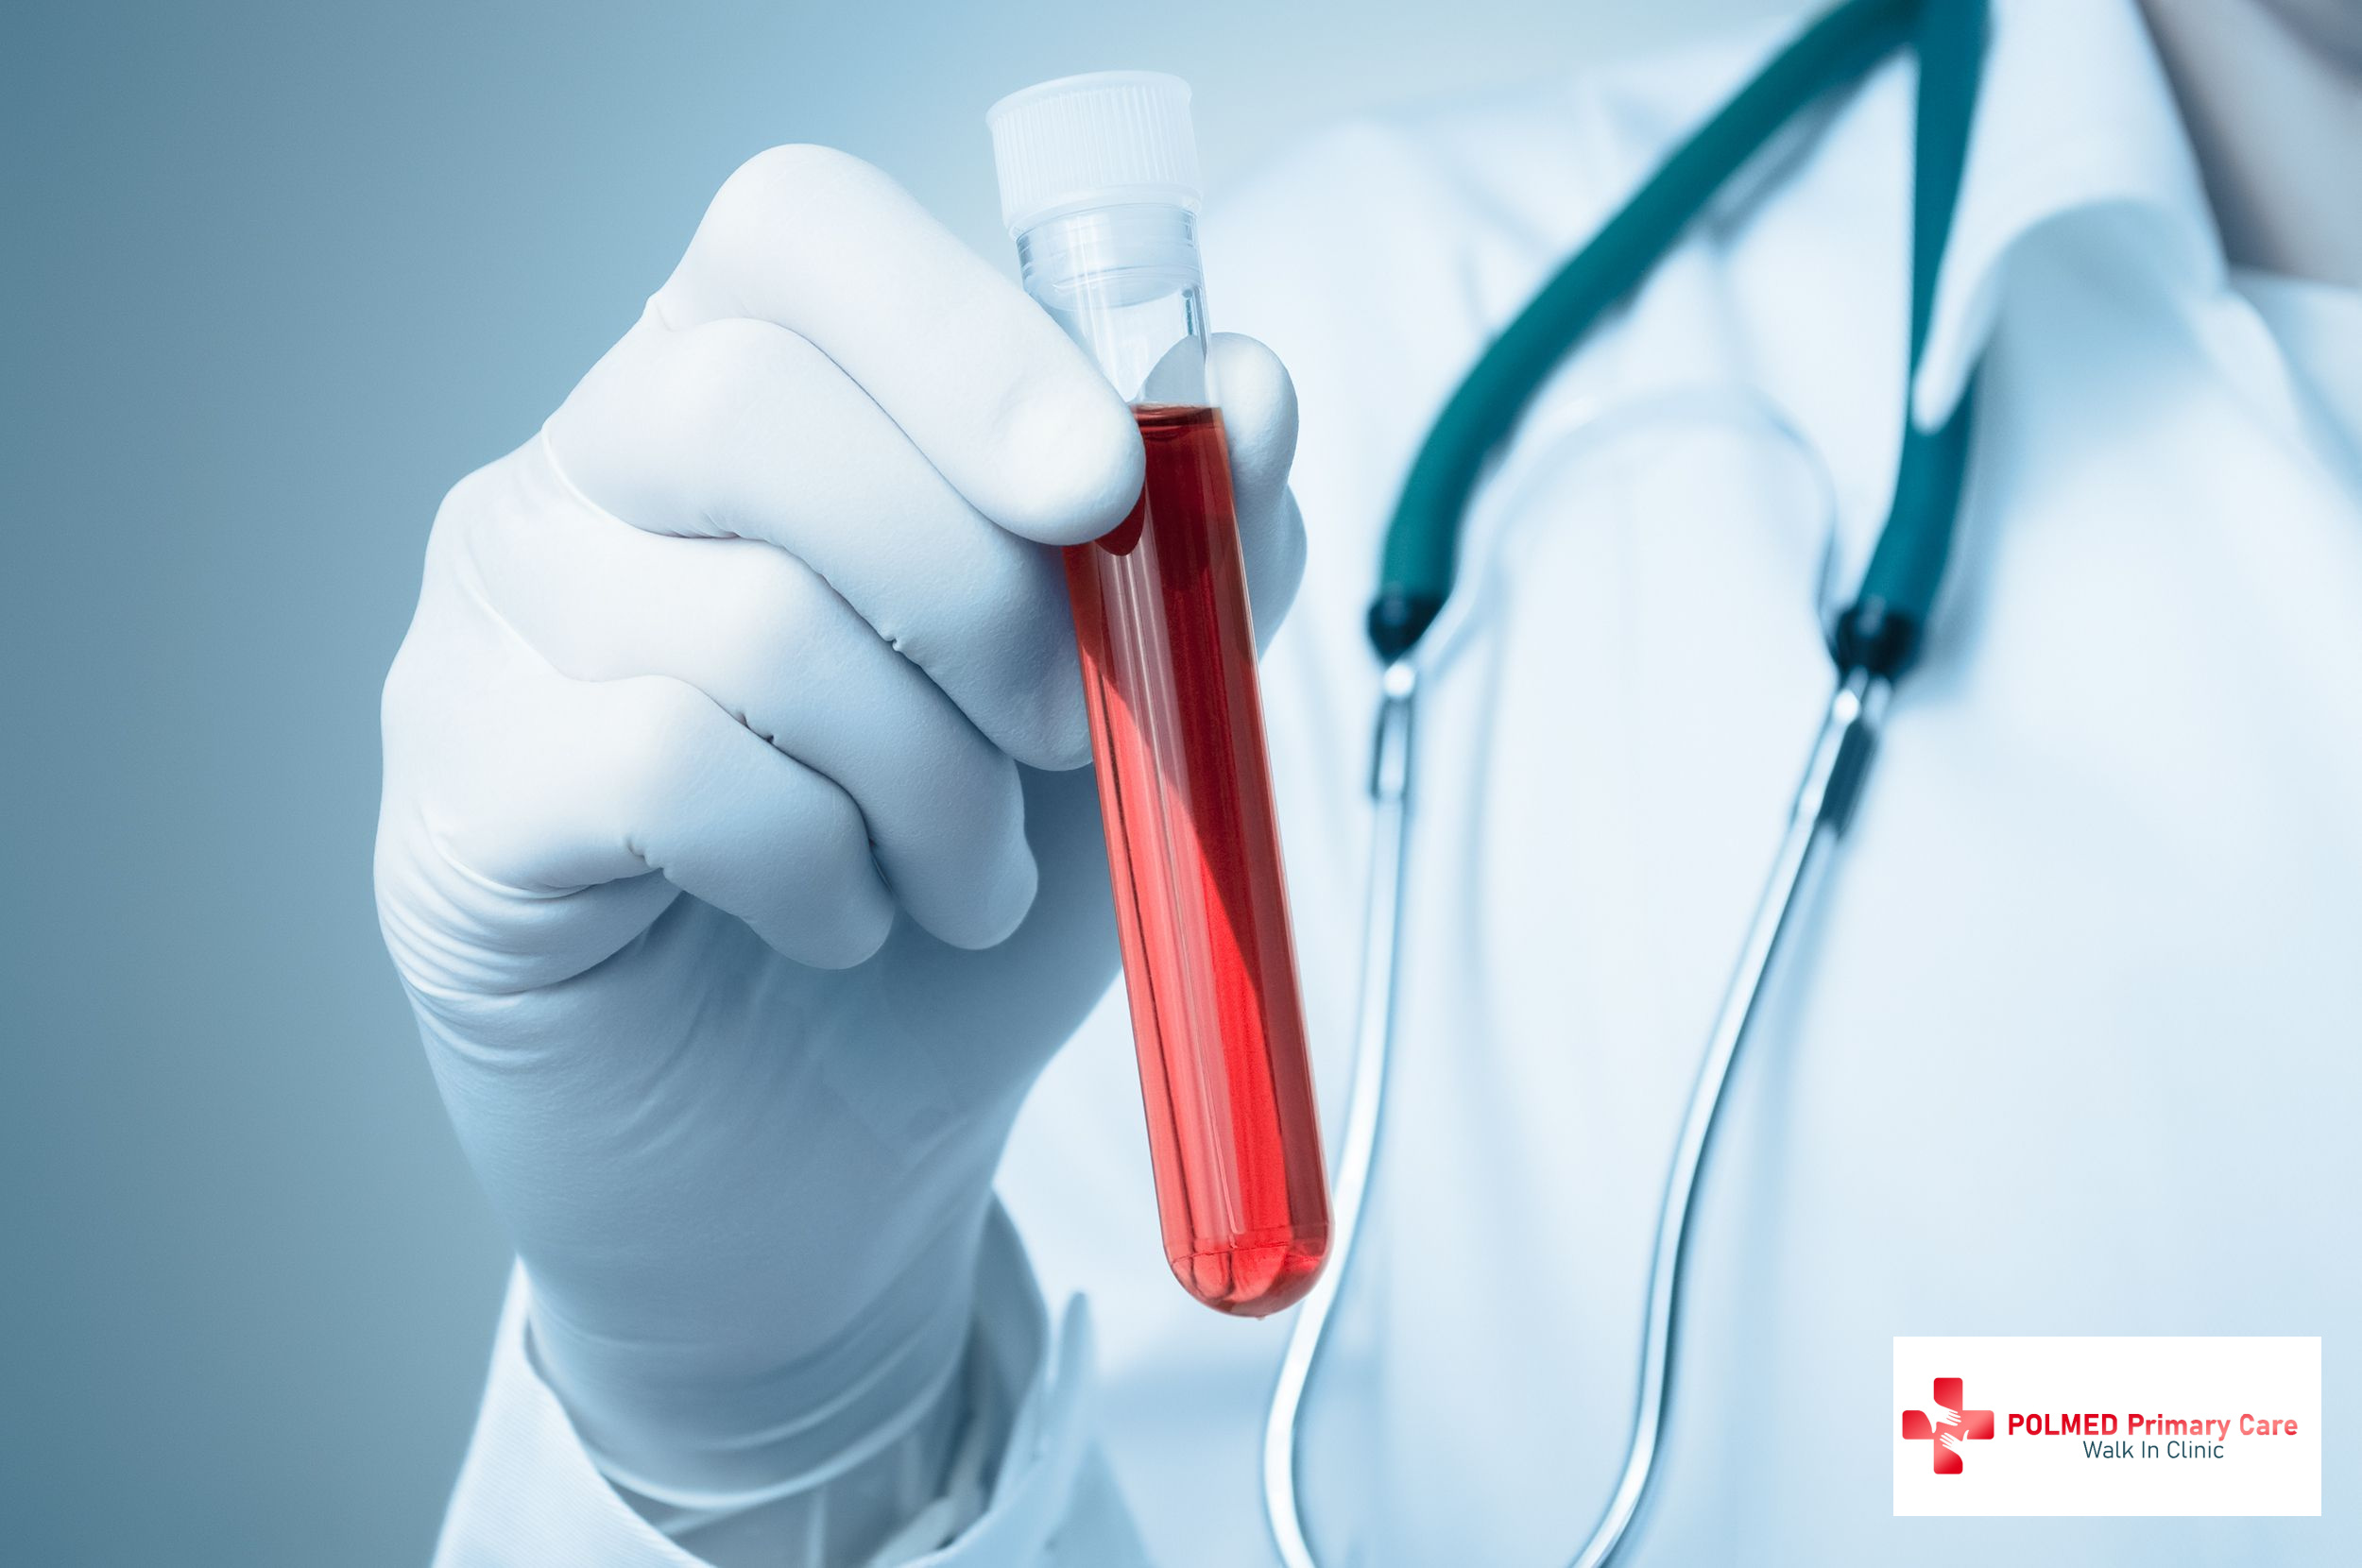 Efficient and Accurate Blood Testing Services at Polmed Primary Care